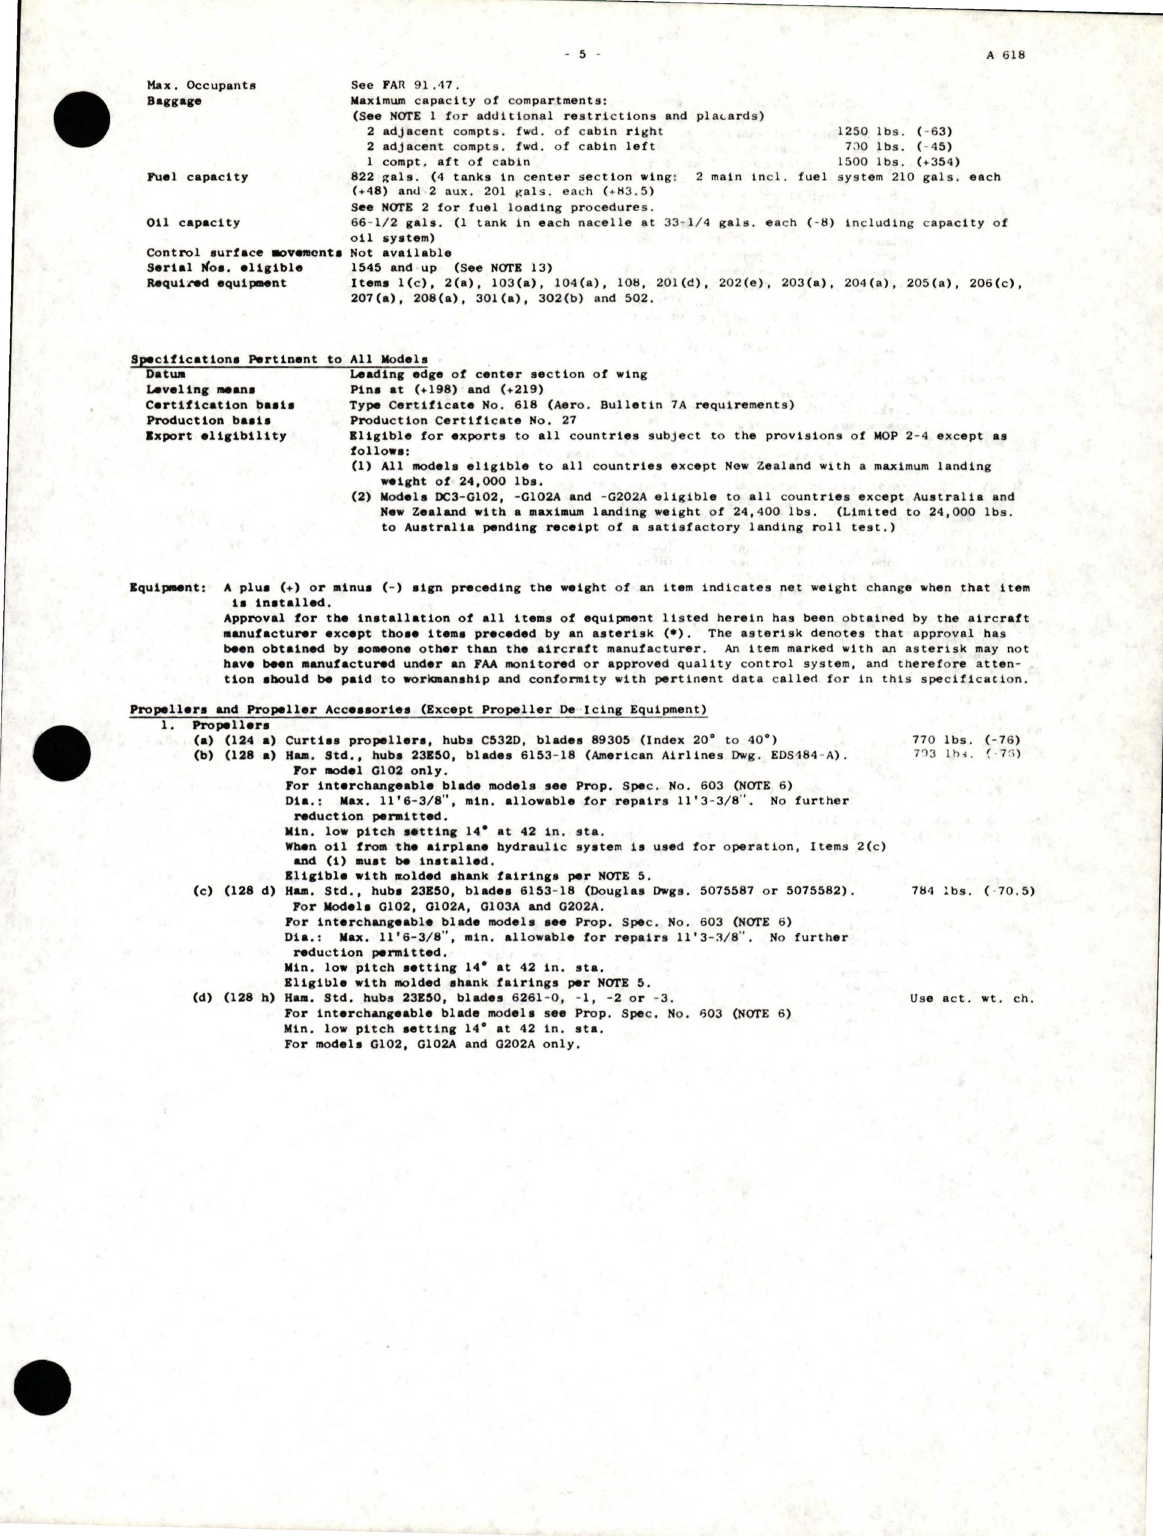 Sample page 5 from AirCorps Library document: DC3-G102, DC3-G102A (C-49E, C-50, C-51), DC3-G103A, DC3-G202A (C-49) R4D-2